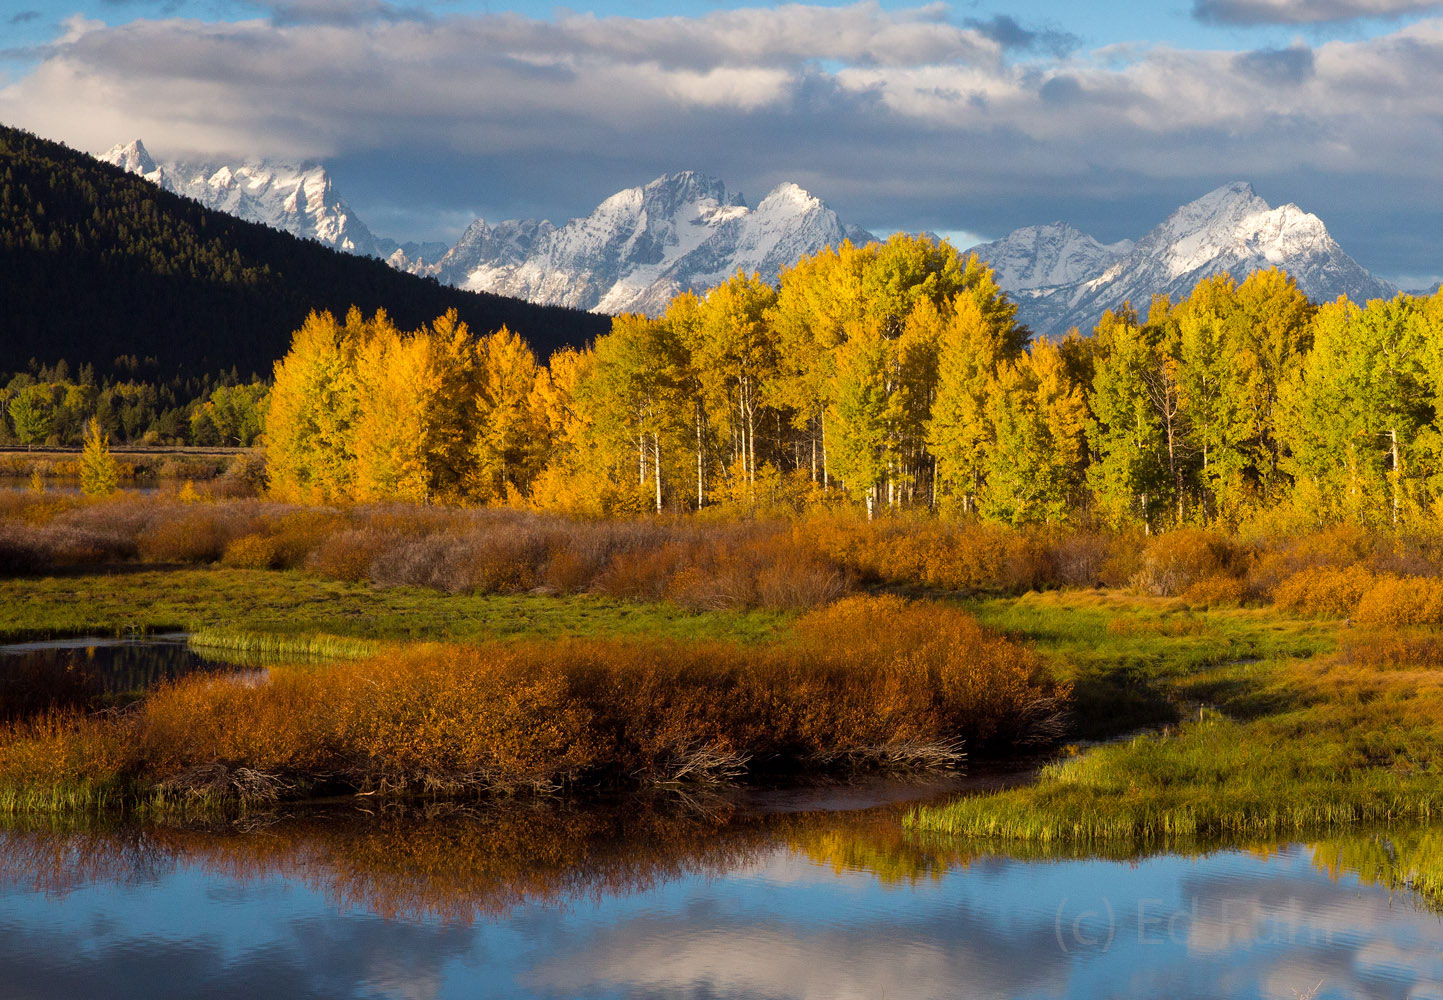 Russet willows, golden aspen, snow-covered Mt. Moran and a passing storm:  what a way to wake up!